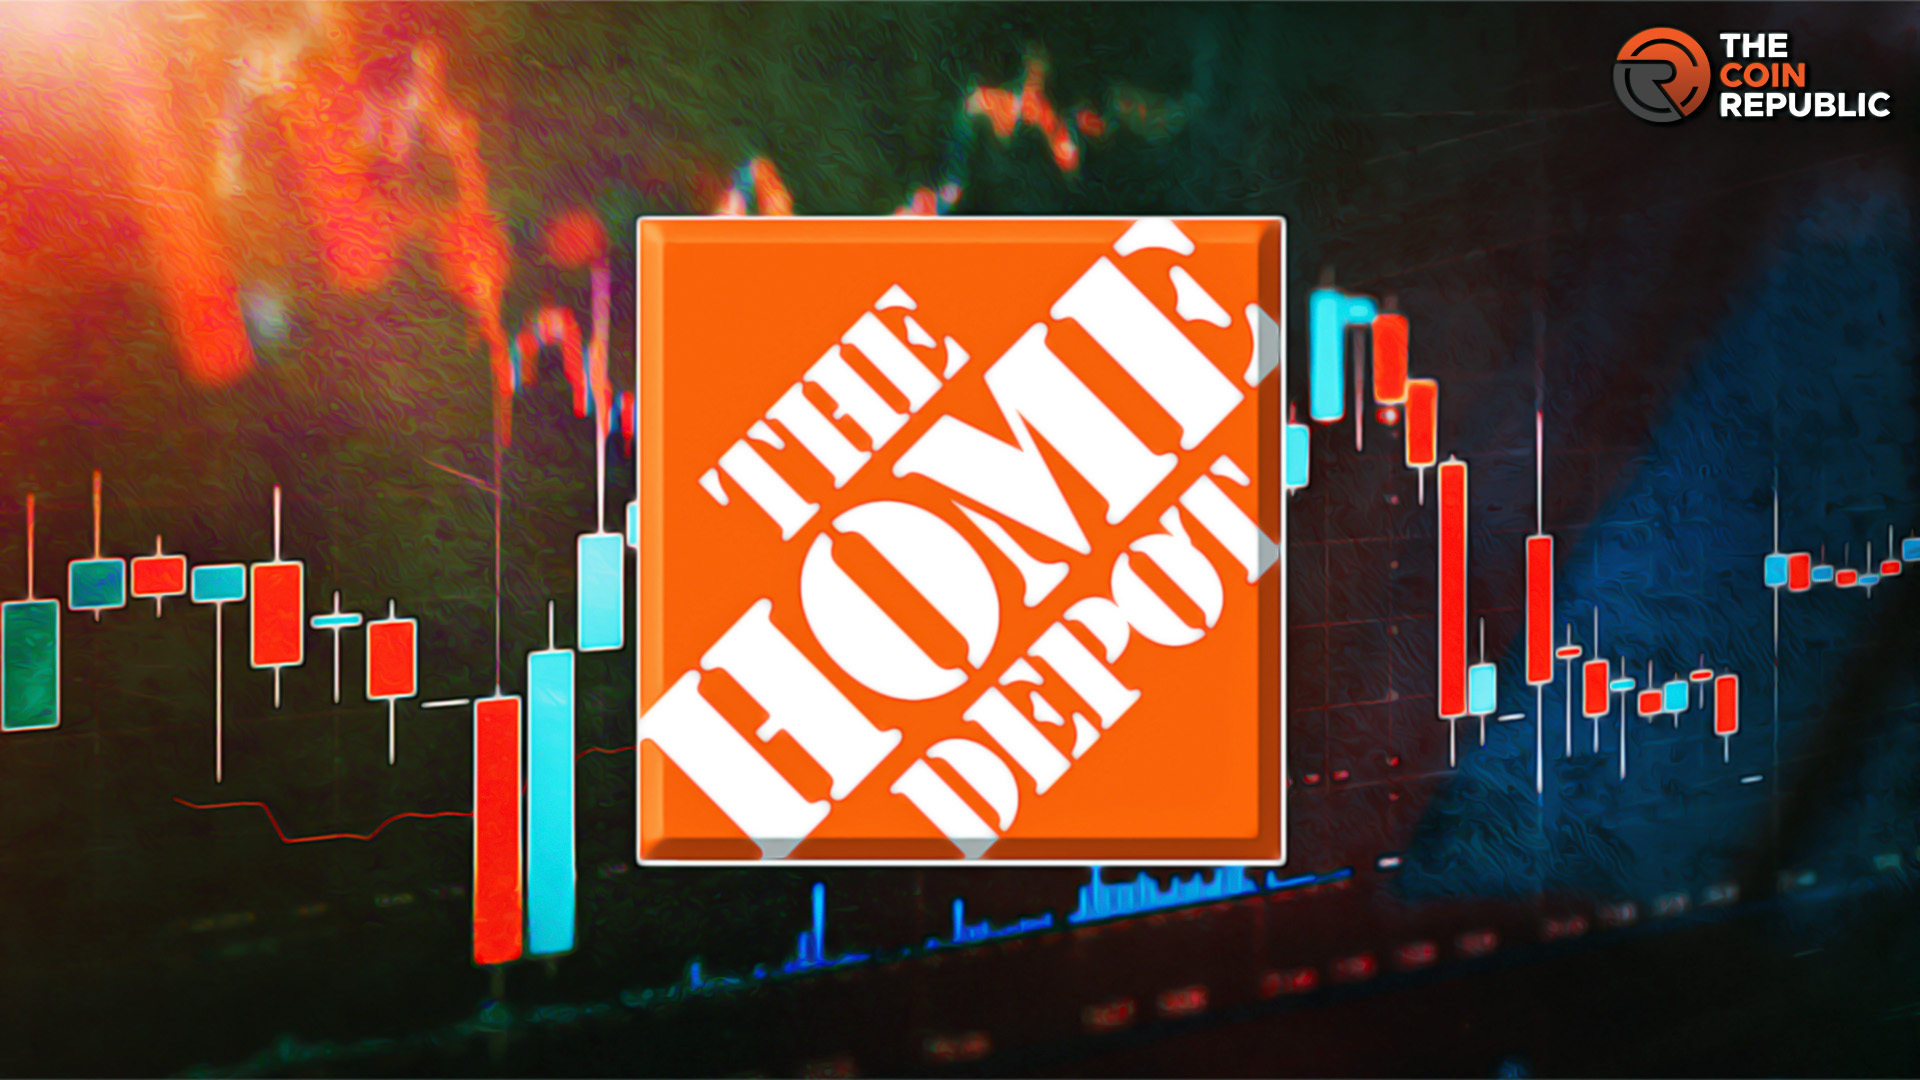 Home Depot Stock in Position to Leverage Healthy Housing Sector